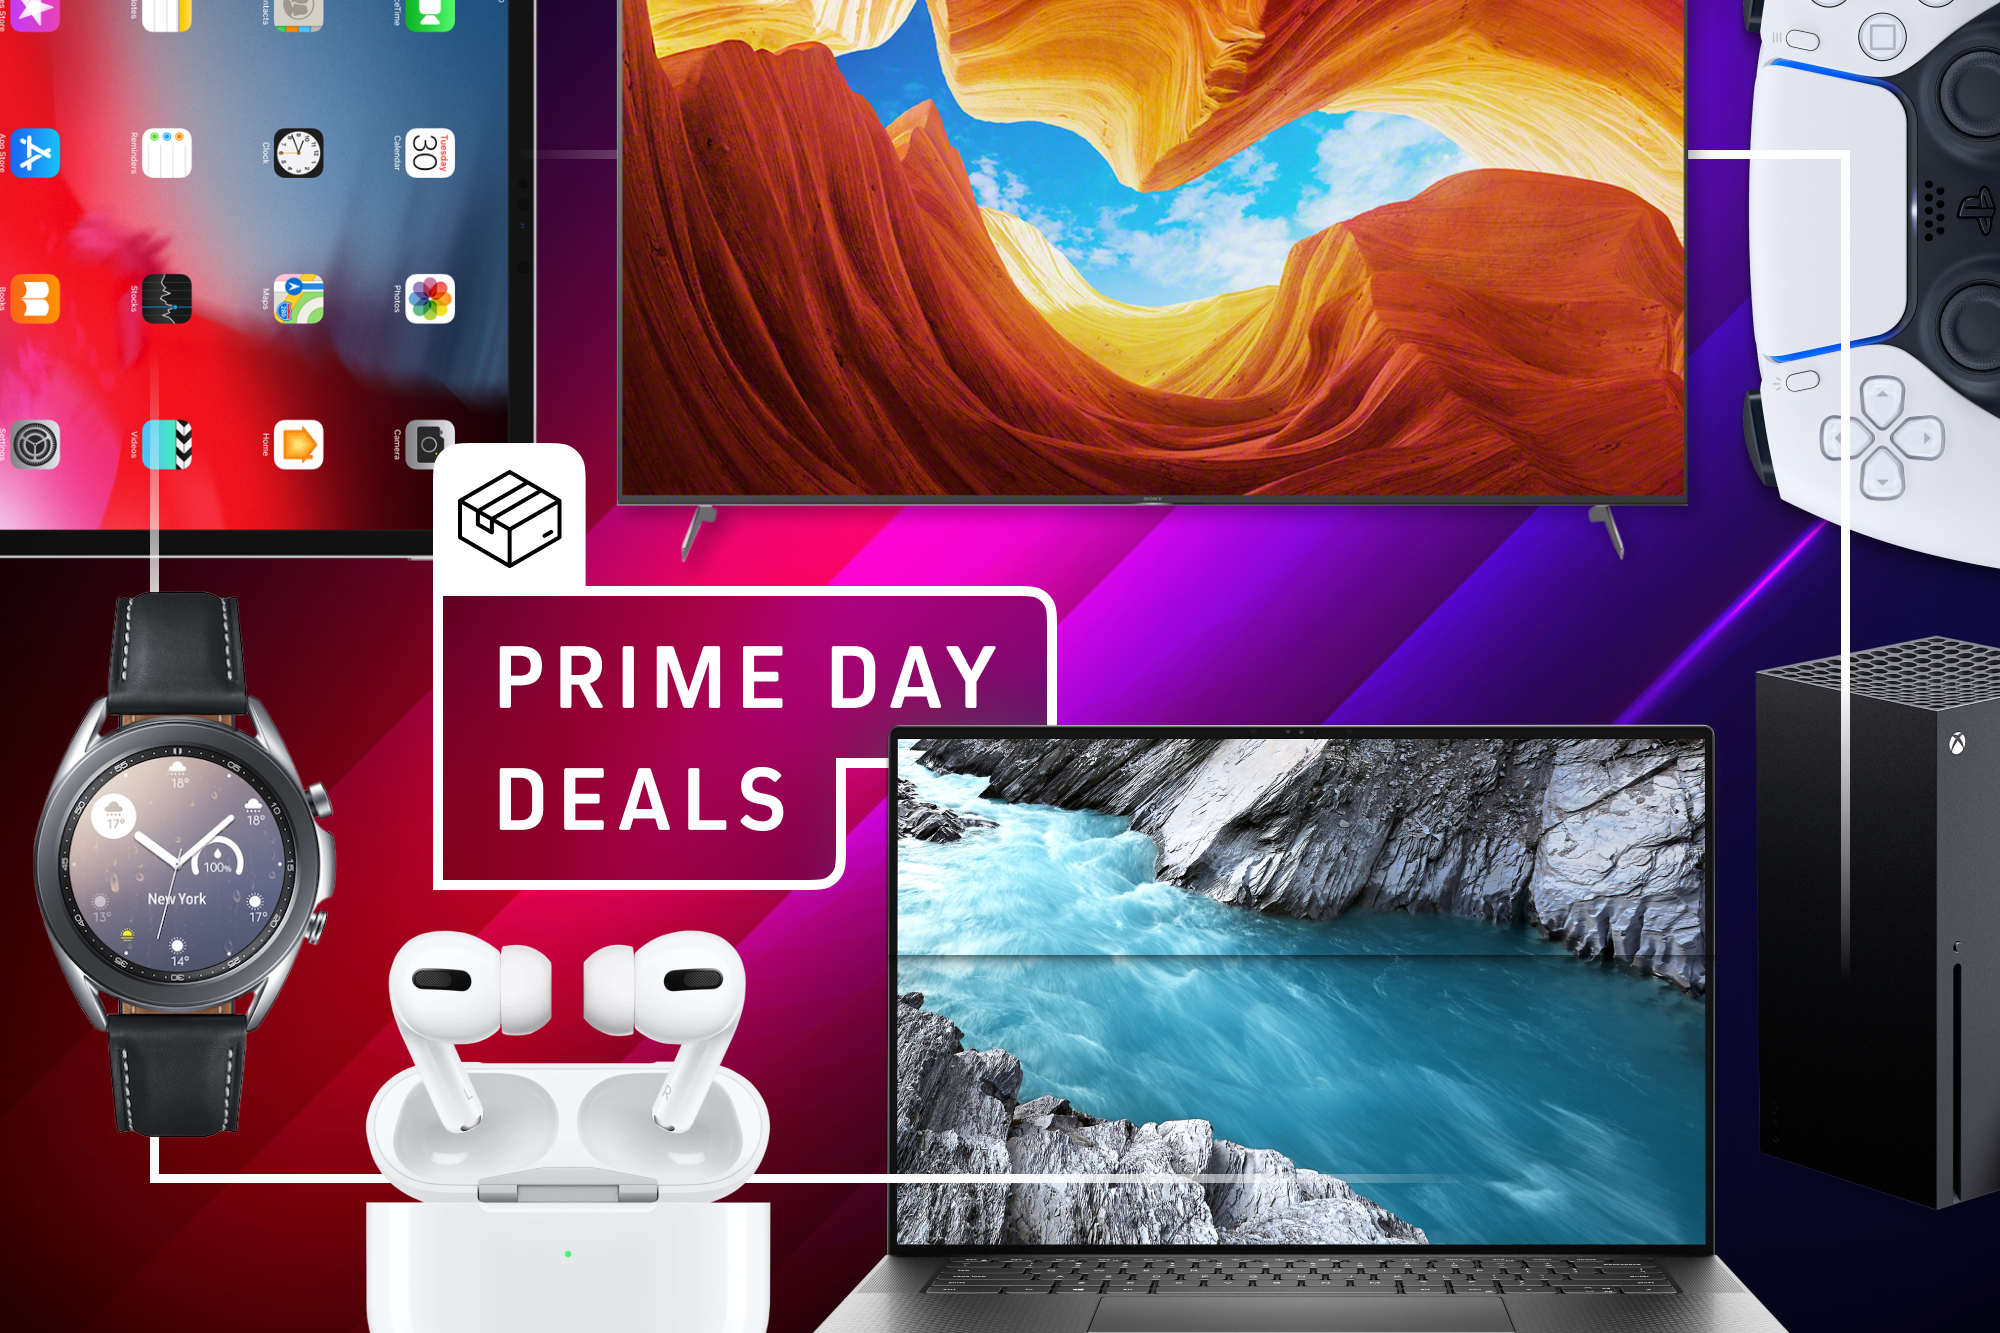 https://www.digitaltrends.com/wp-content/uploads/2022/07/Prime-Day-2022-Featured-Image.png?p=1